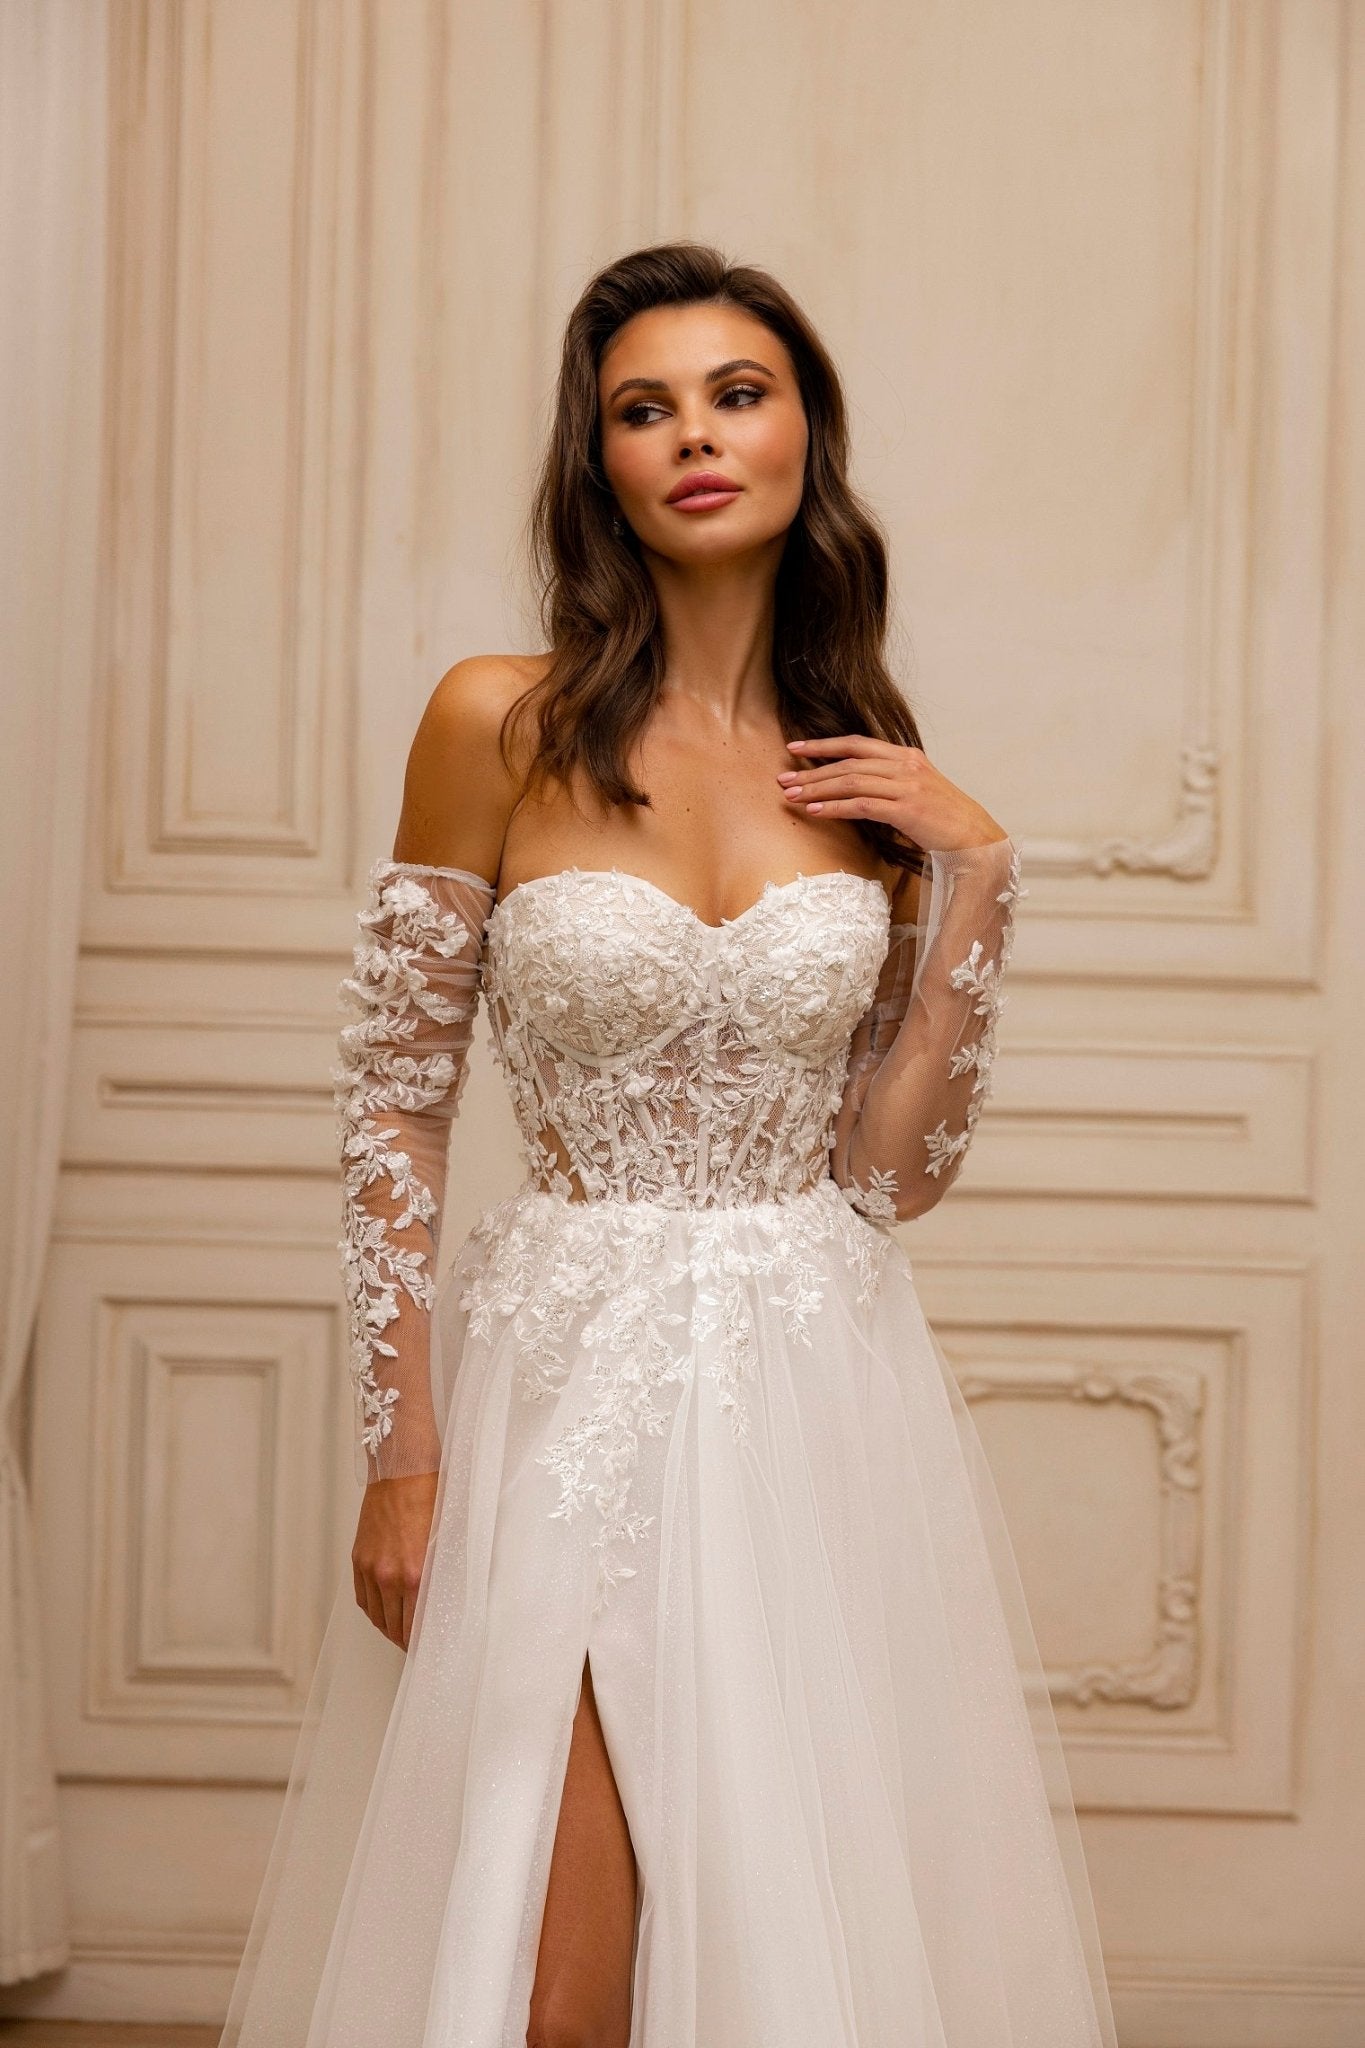 Stunning Off-the-Shoulder Ball Gown with Lace Appliqués and Dramatic Train Plus Size - WonderlandByLilian